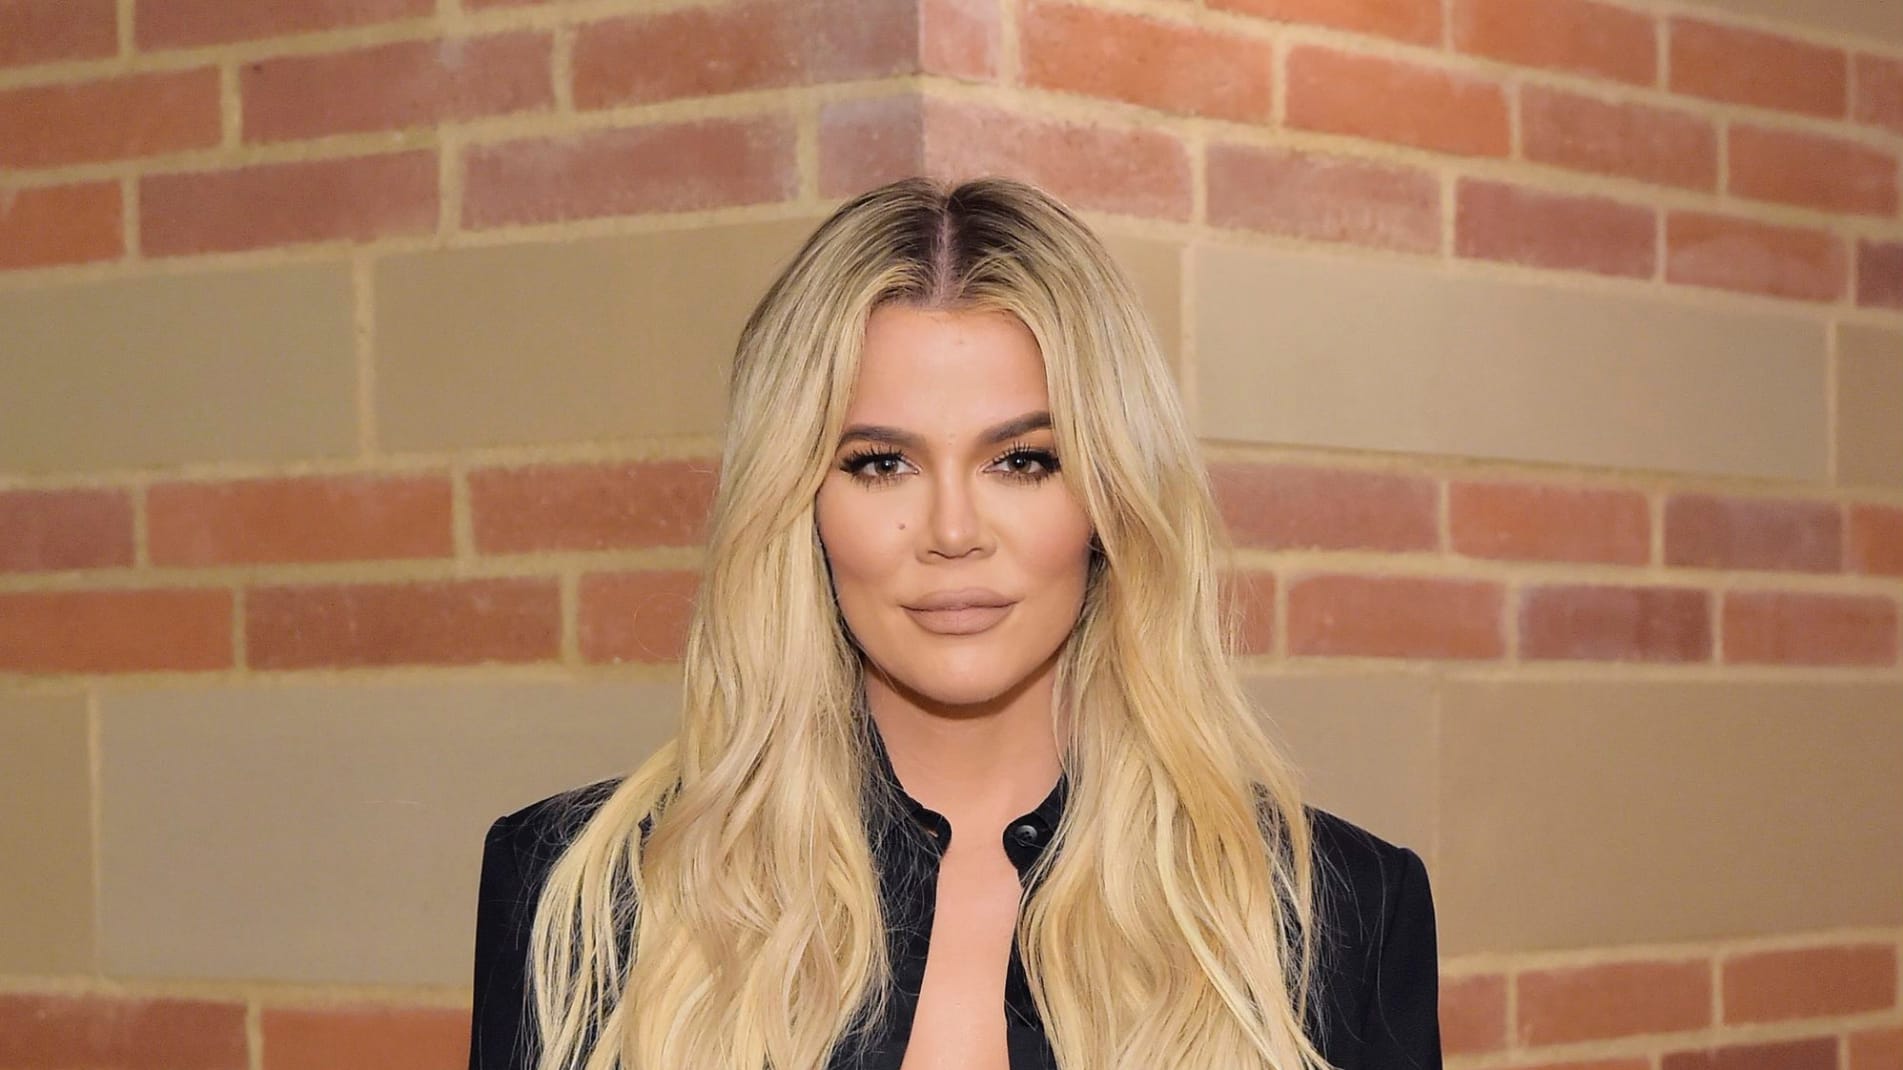 LOS ANGELES, CALIFORNIA - NOVEMBER 19: Khloe Kardashian attends The Promise Armenian Institute Event At UCLA at Royce Hall on November 19, 2019 in Los Angeles, California. (Photo by Stefanie Keenan/Getty Images for UCLA)